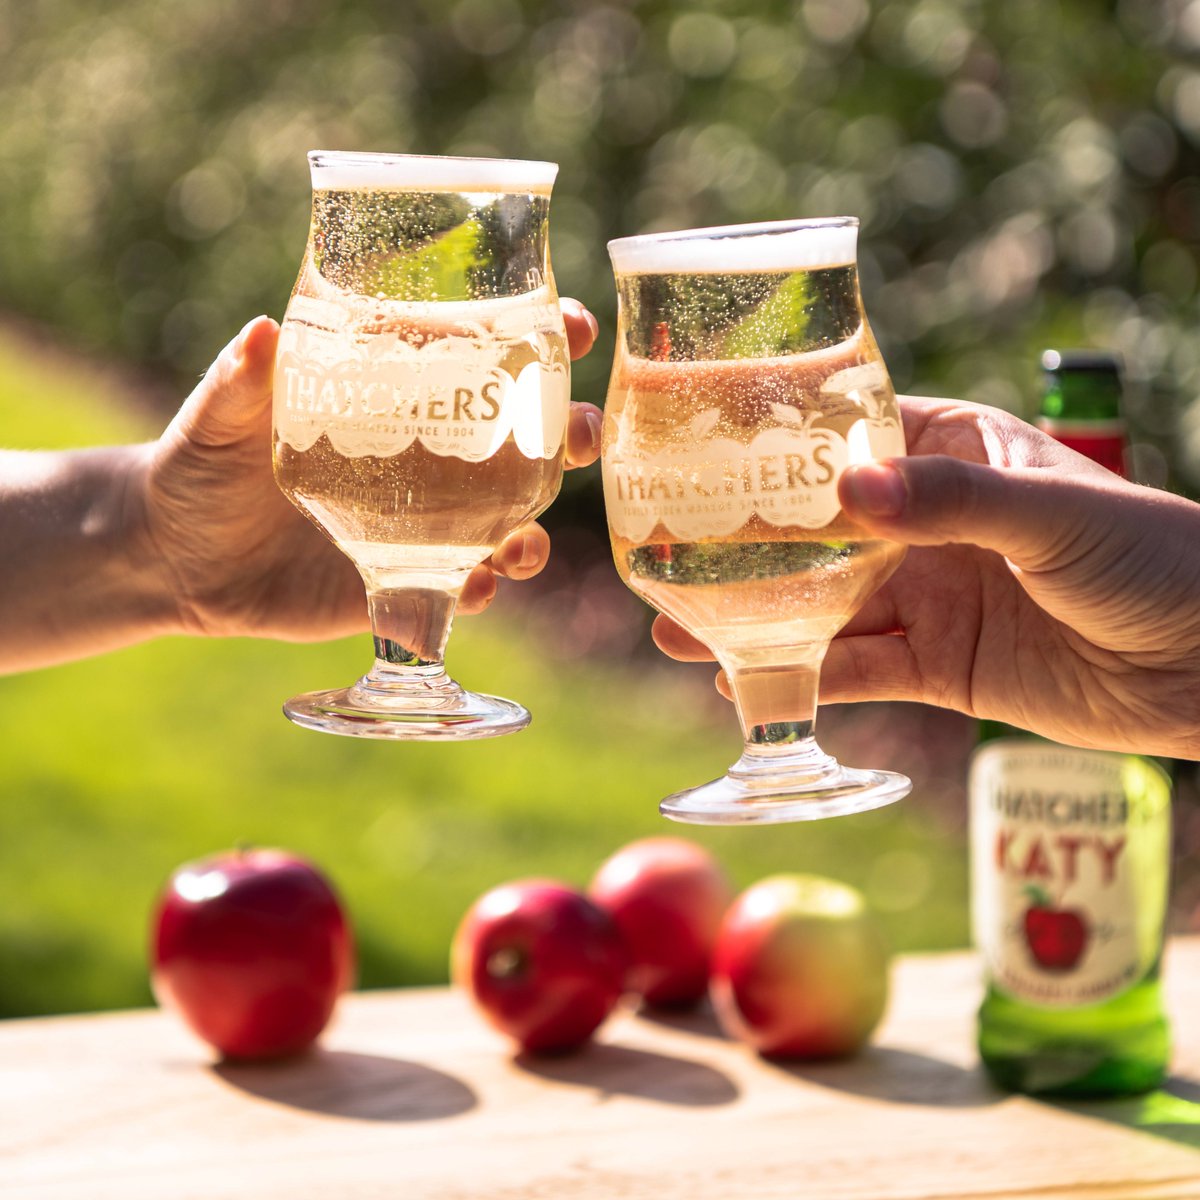 #worldpoetryday Can you do better than ai? Pop your poem in the comments below and we’ll giveaway a case of cider to the best on show! In orchards bathed in golden light, Where apples blush, a sweet delight. Thatcher's cider, a symphony grand, A sip of Katy, crafted by hand.